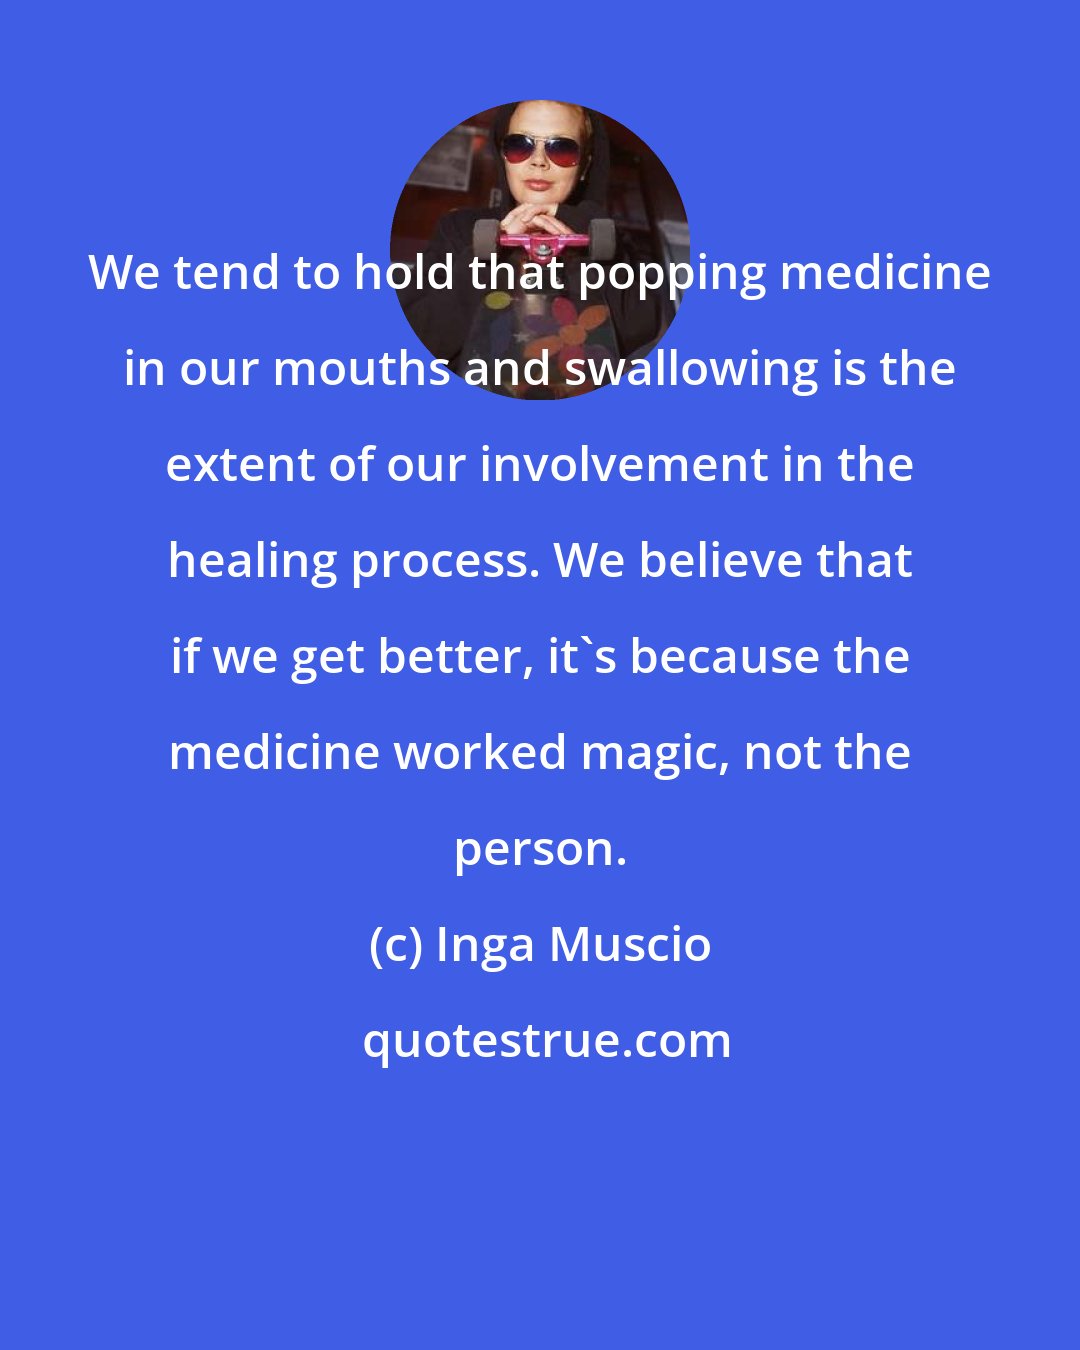 Inga Muscio: We tend to hold that popping medicine in our mouths and swallowing is the extent of our involvement in the healing process. We believe that if we get better, it's because the medicine worked magic, not the person.